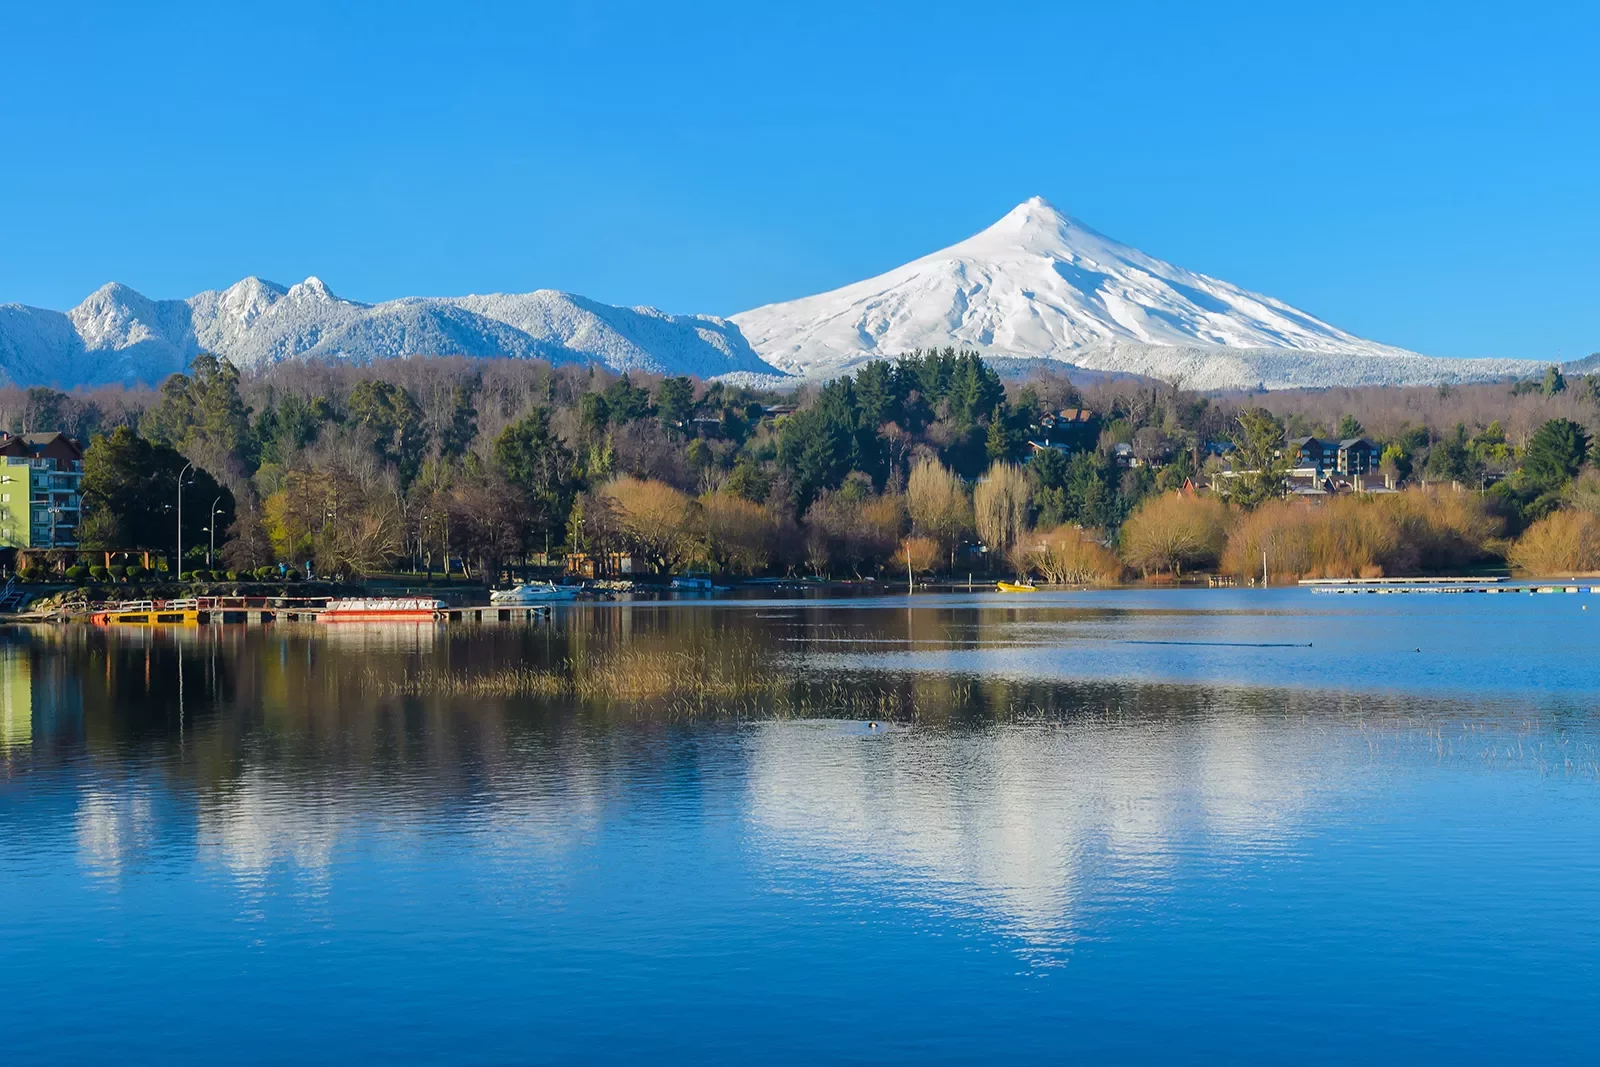 Snow capped mountain in the background of a lake